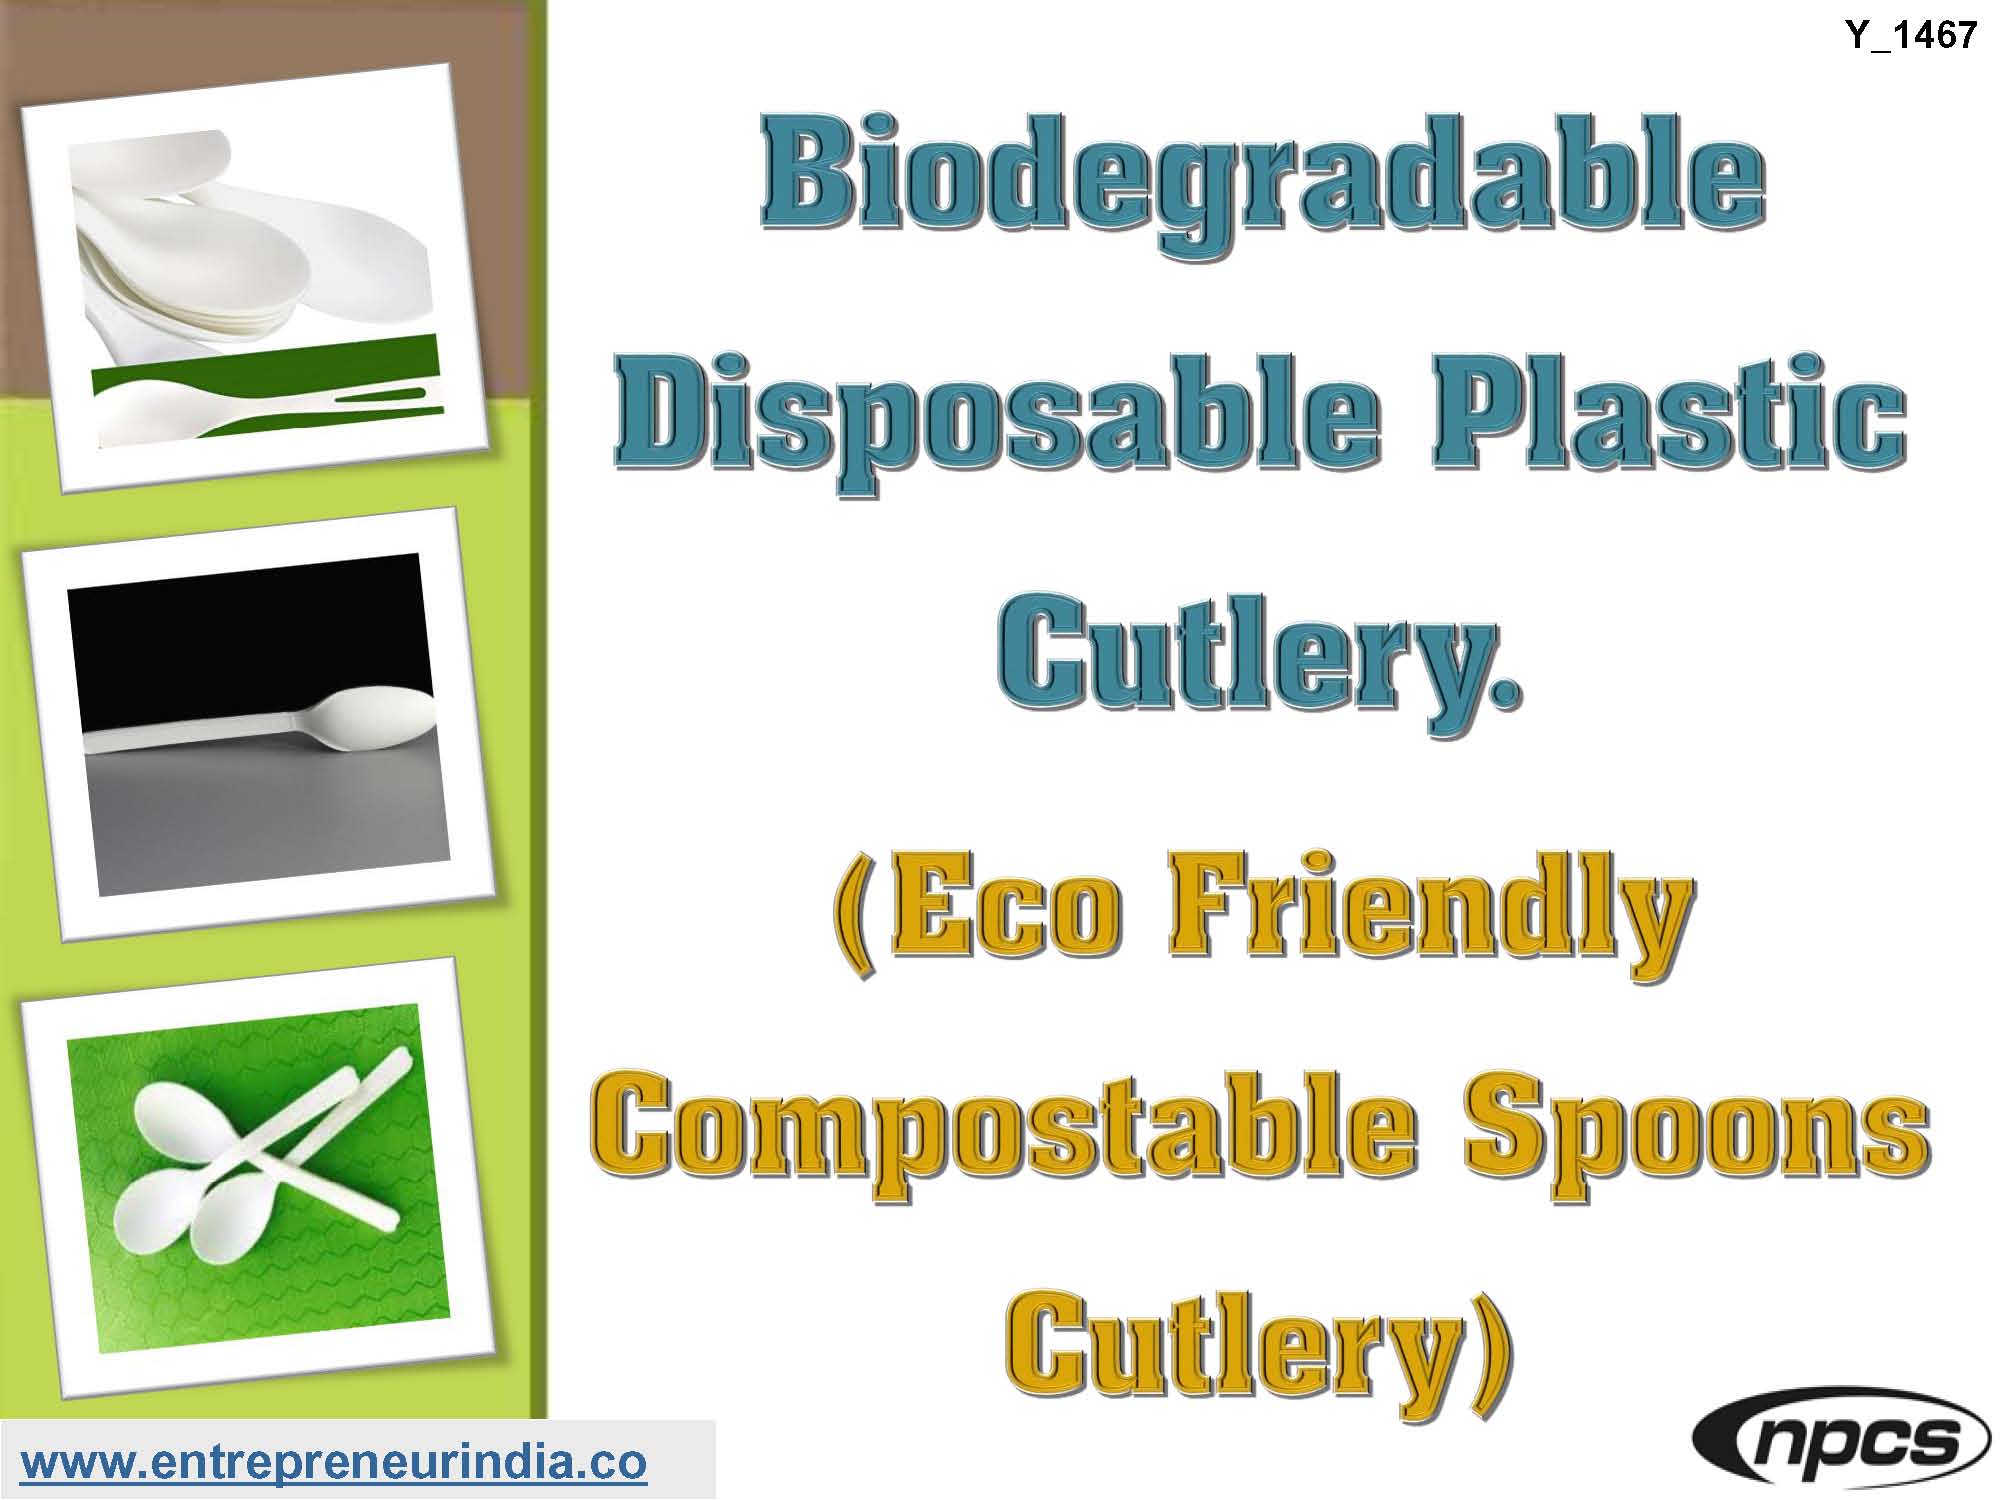 Biodegradable Disposable Plastic Cutlery